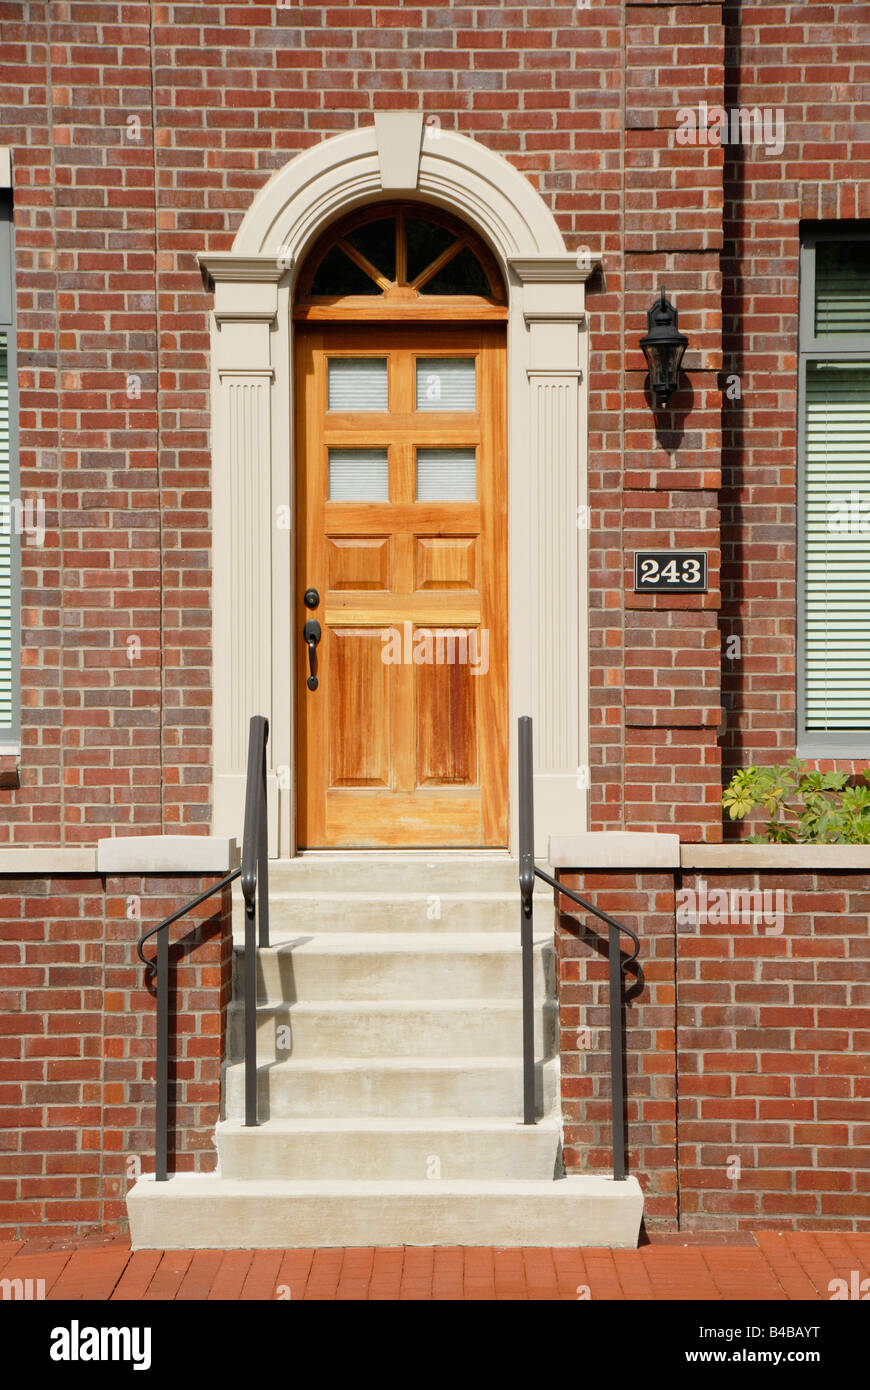 Red brick building and arched door Stock Photo